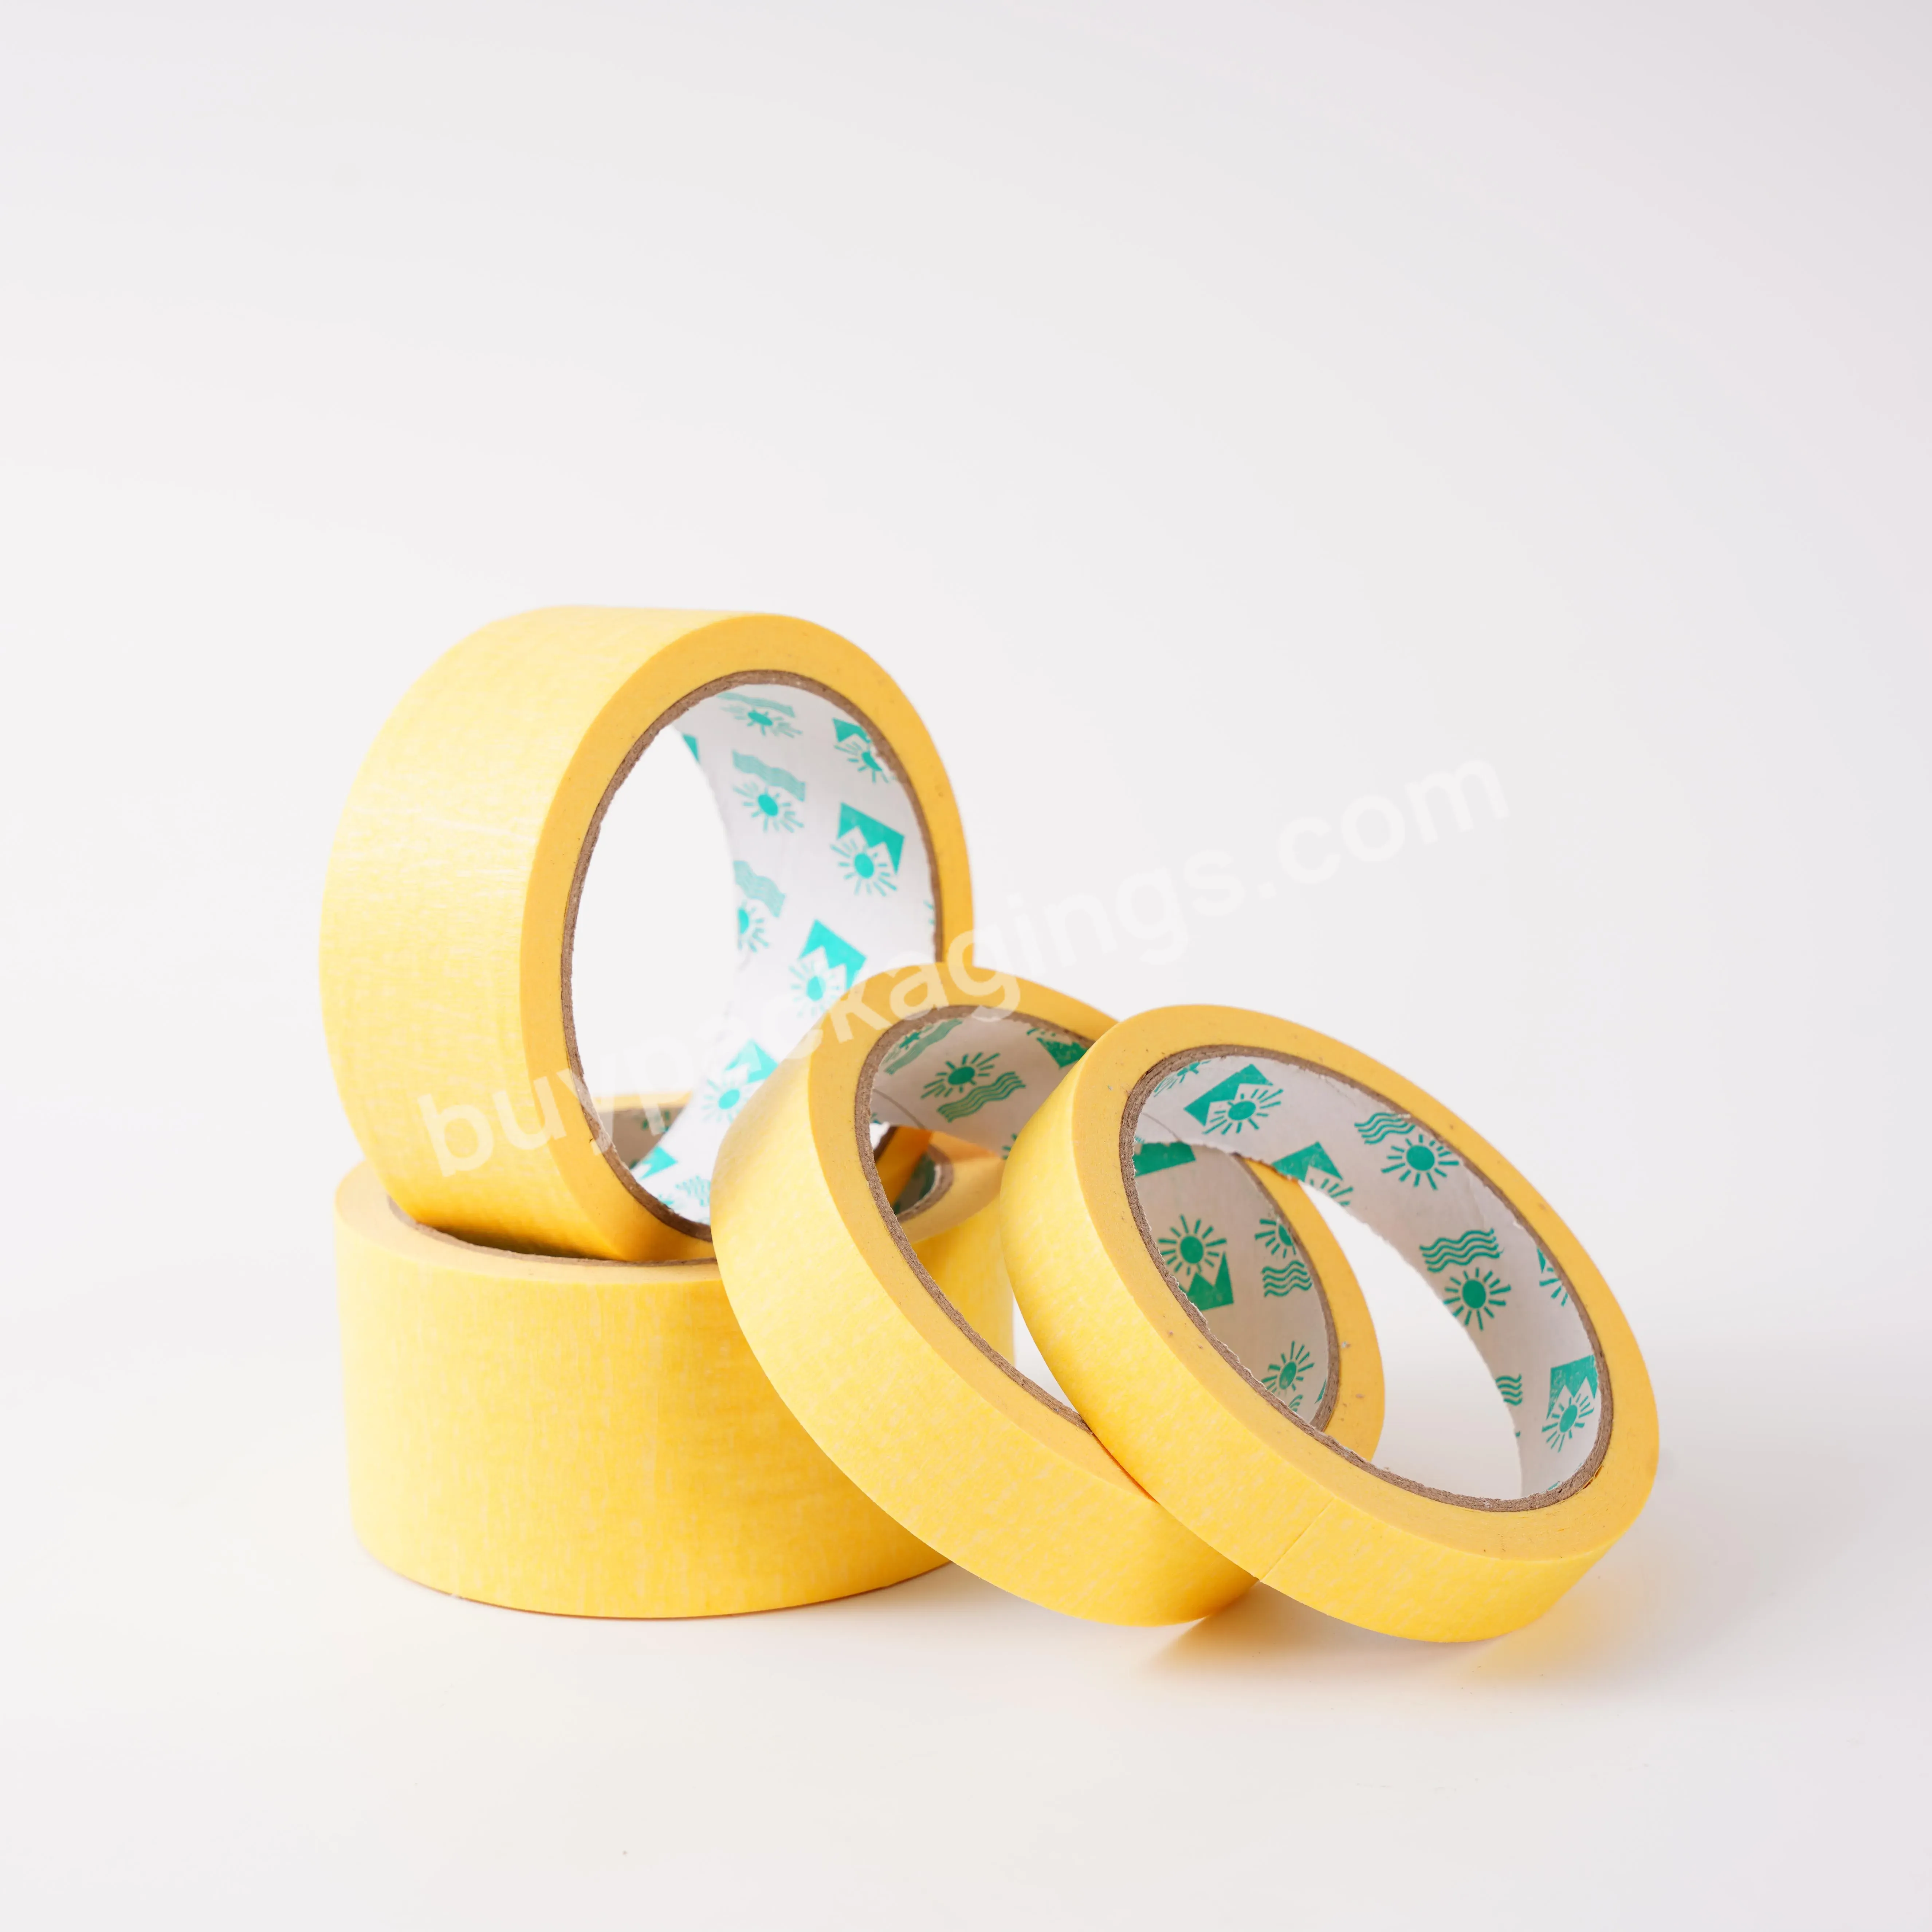 Cheap Price Refinish Masking Tape For Car Painting Use With Temperature Resistance - Buy Painter Masking Tape,Masking Tape For Painting,Masking Tape For Cars Painting.